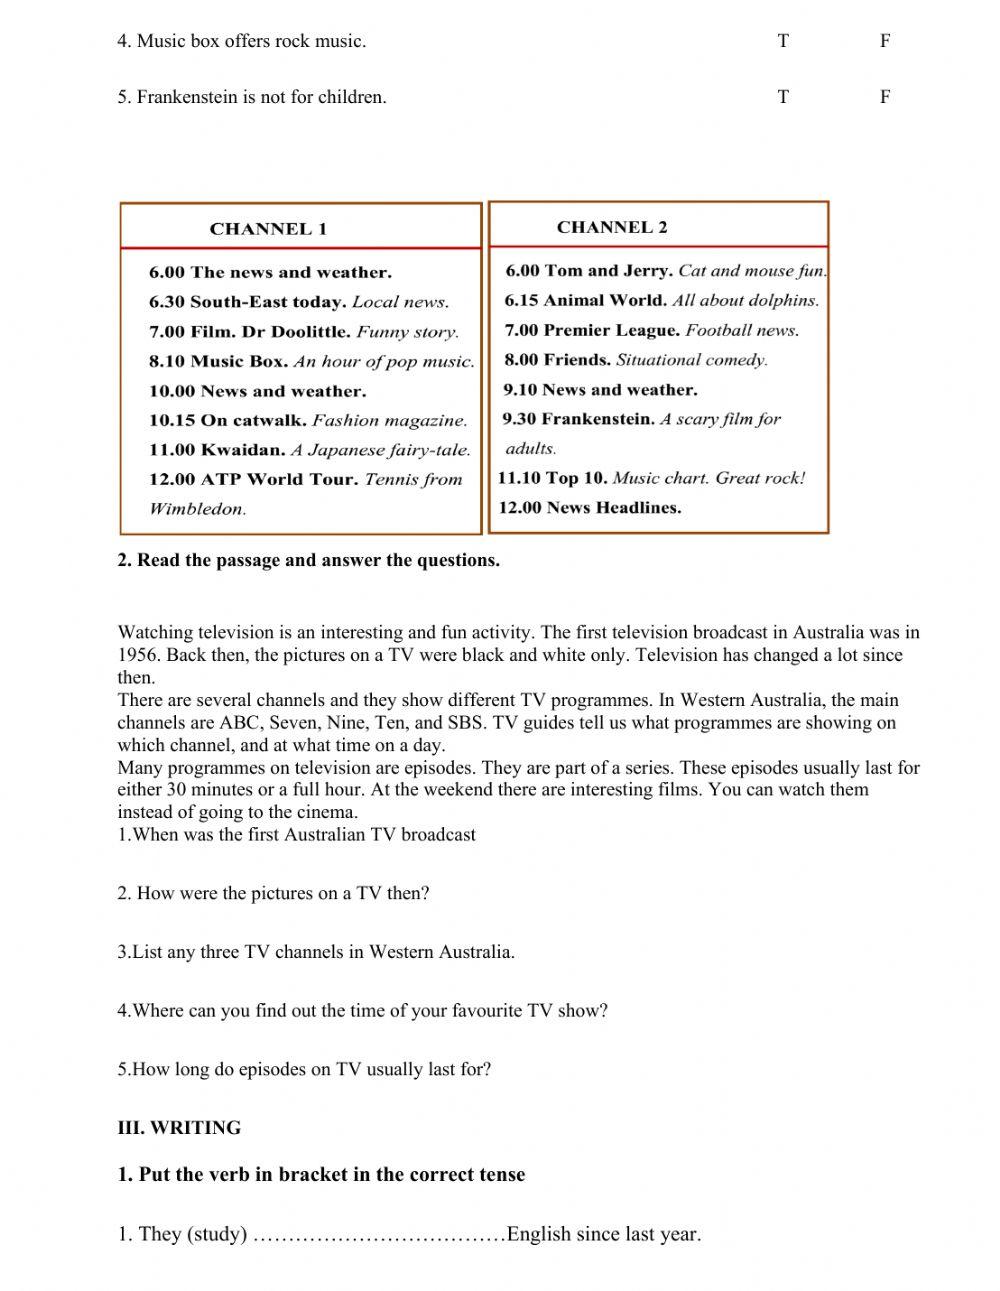 English Middle Test Grade 6-Test 2